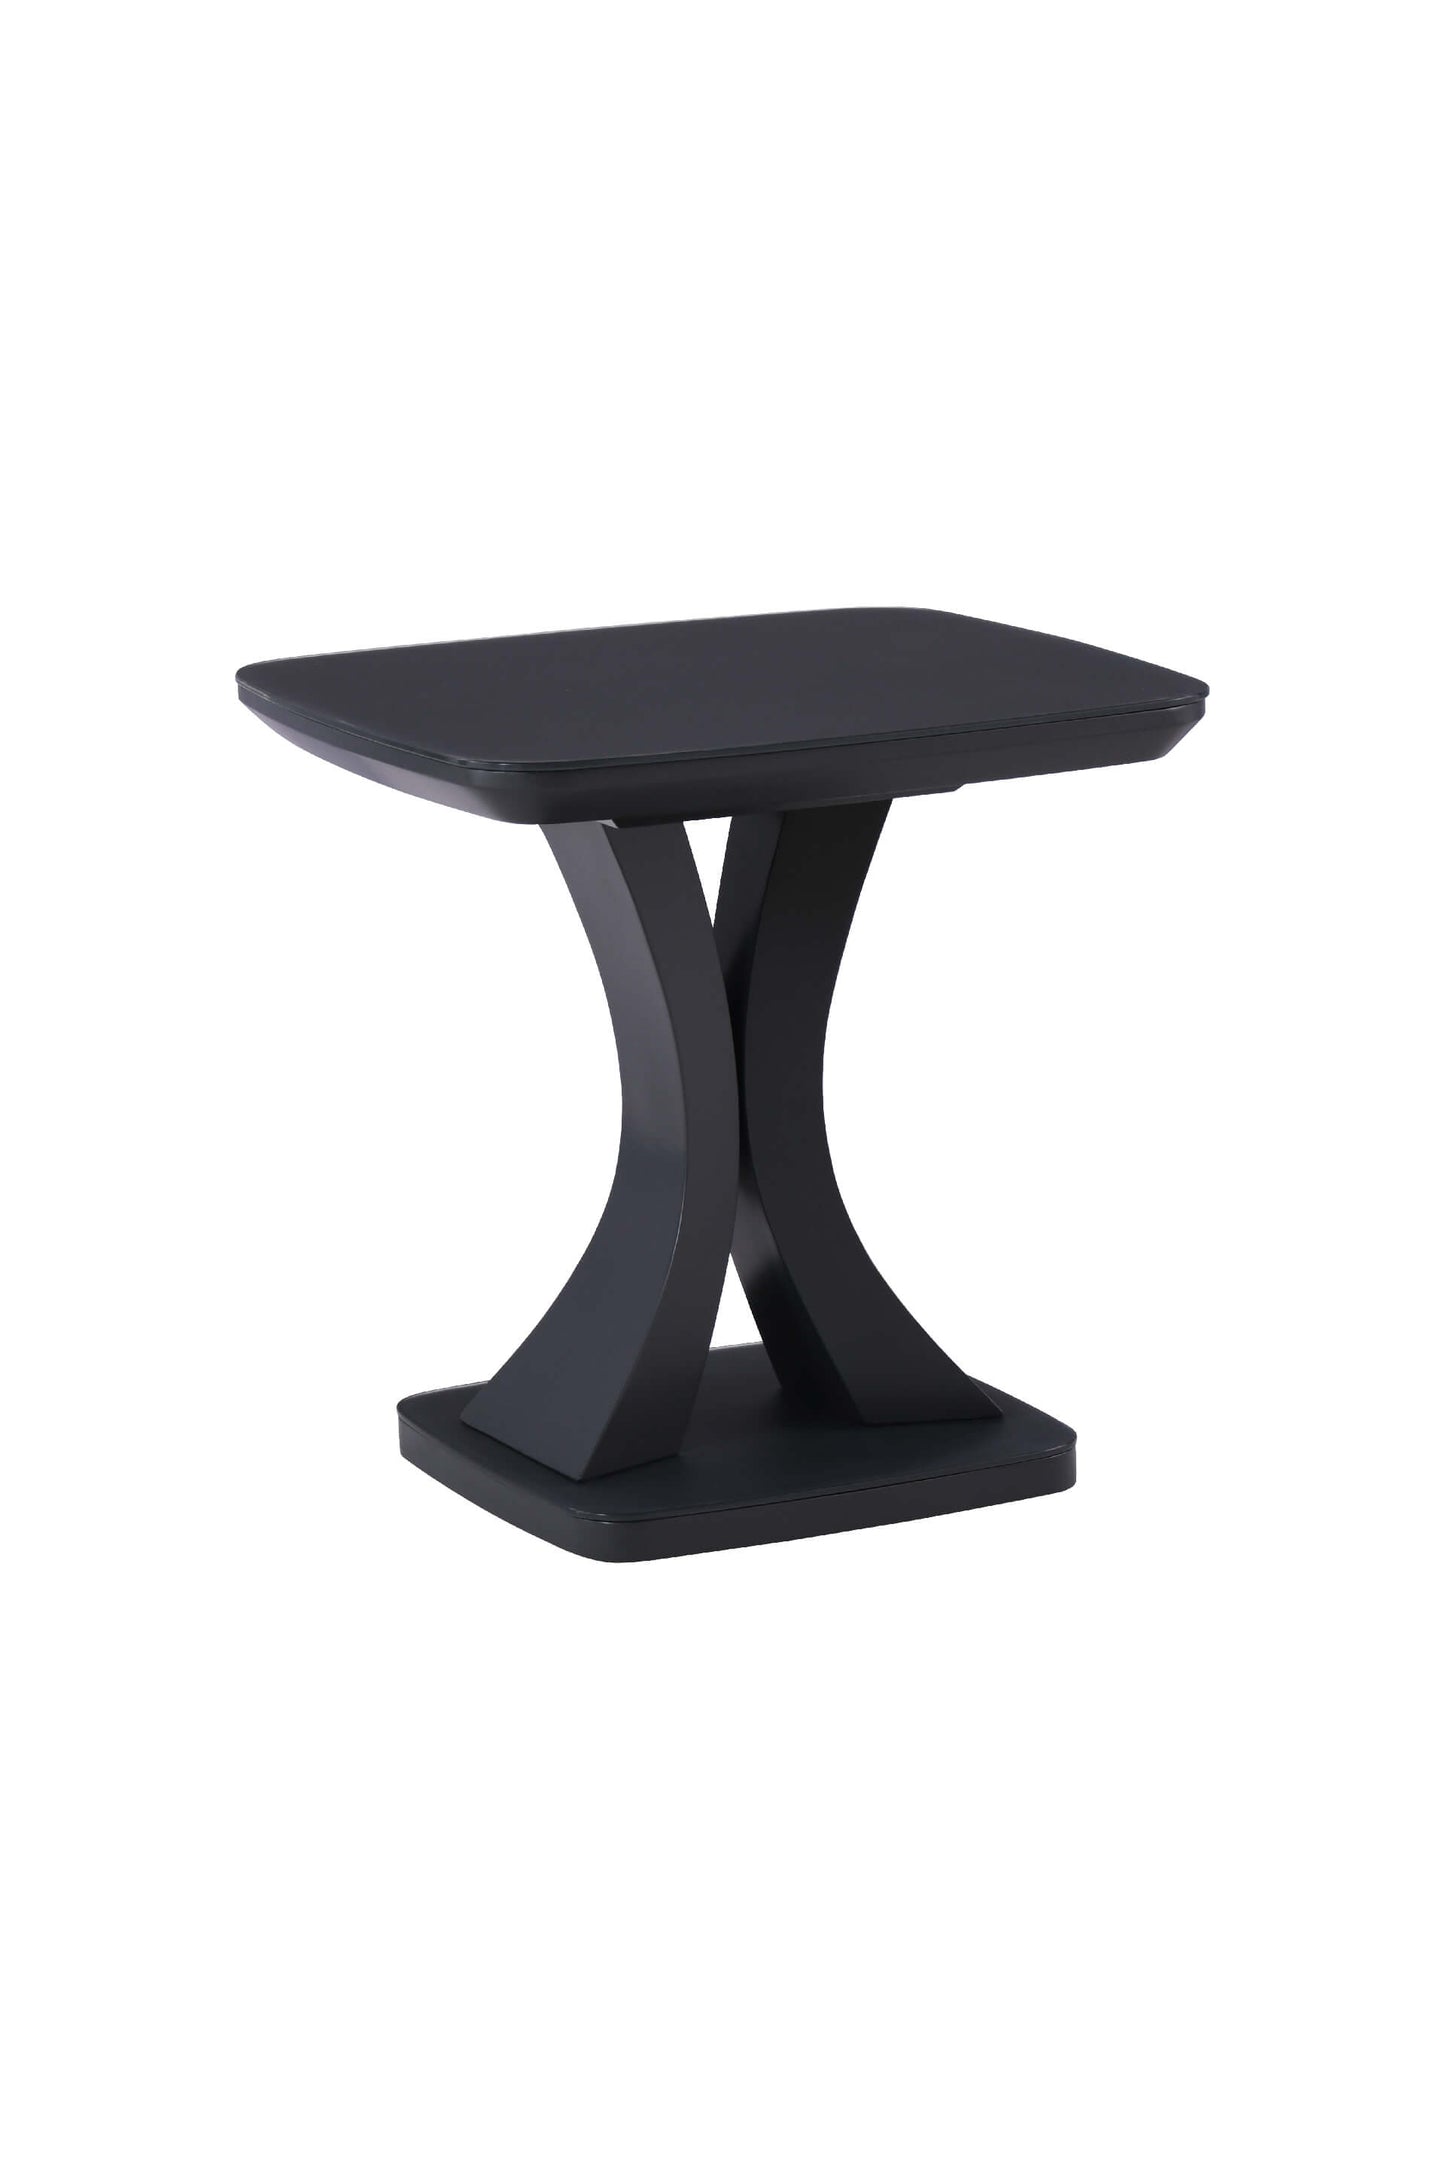 Daiva Lamp Table - Charcoal